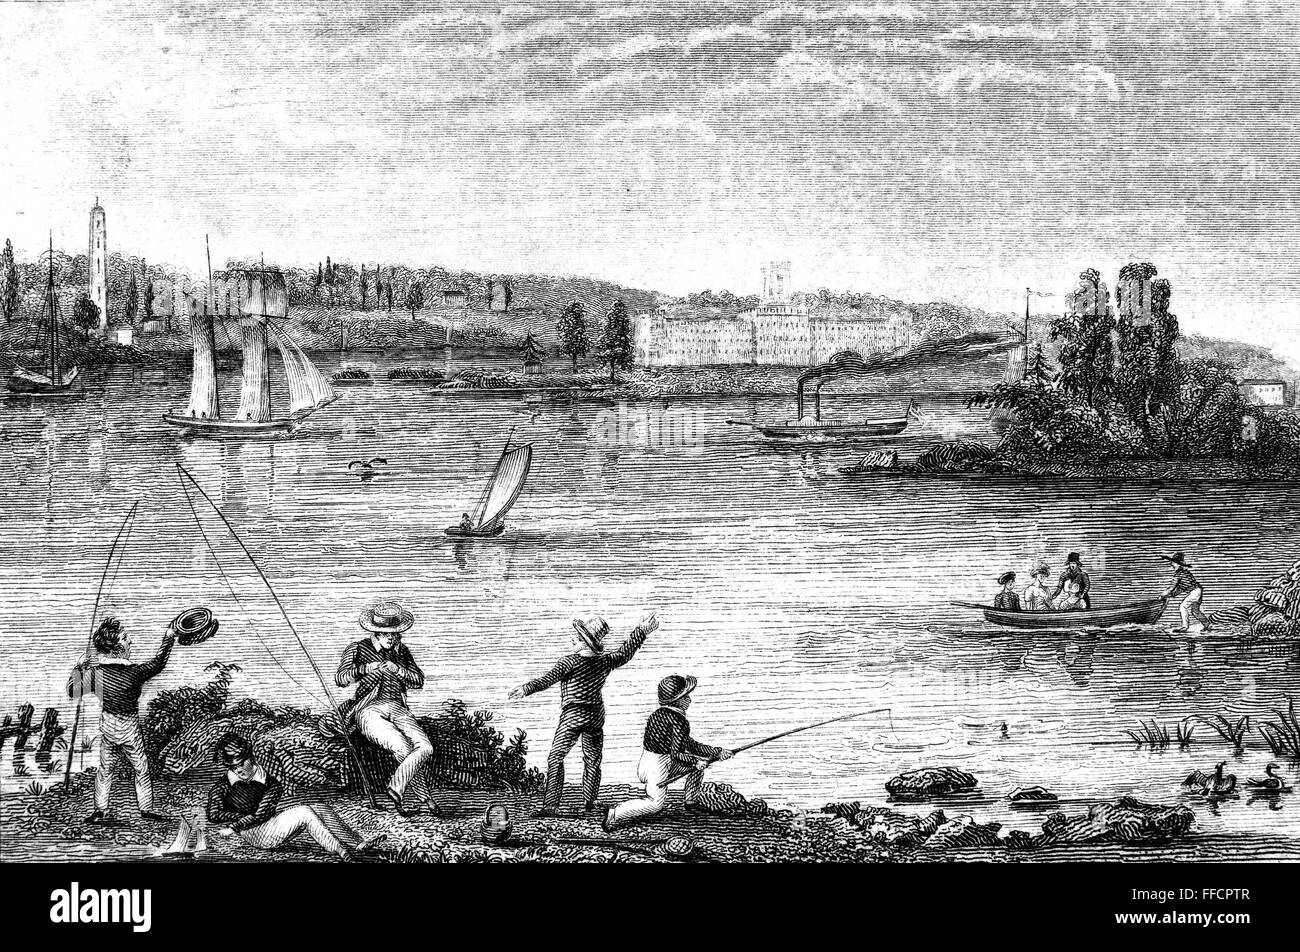 FISHING PARTY, c1835. /nA steamboat approaches as young men are having a fishing party at the river's edge. Line engraving, American, c1835. Stock Photo